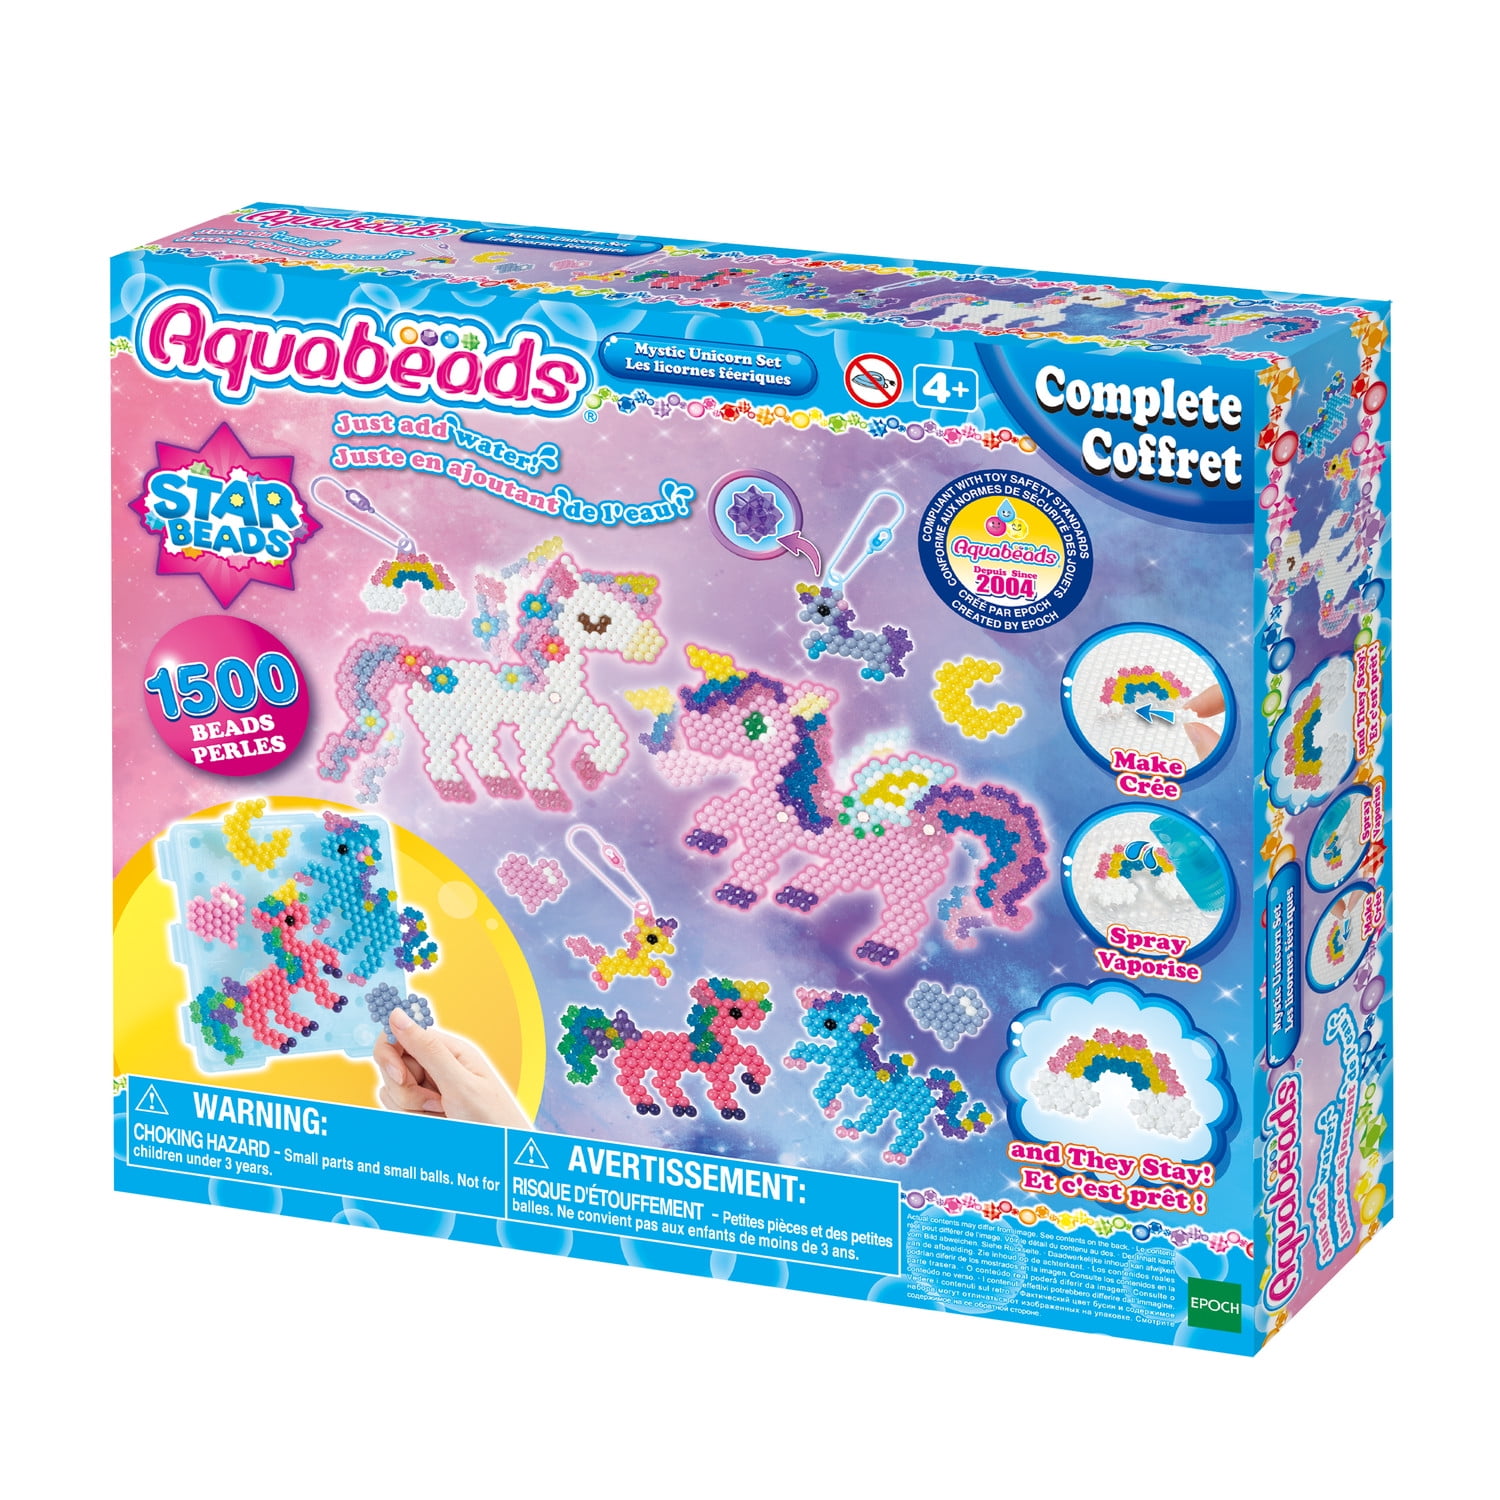 TOYLI Unicorn Modeling Clay Kit with Pink Sparkly Foam Beads and Clay Art DIY for Kids Age 6+ Girls Boys, Creativity and Imagination